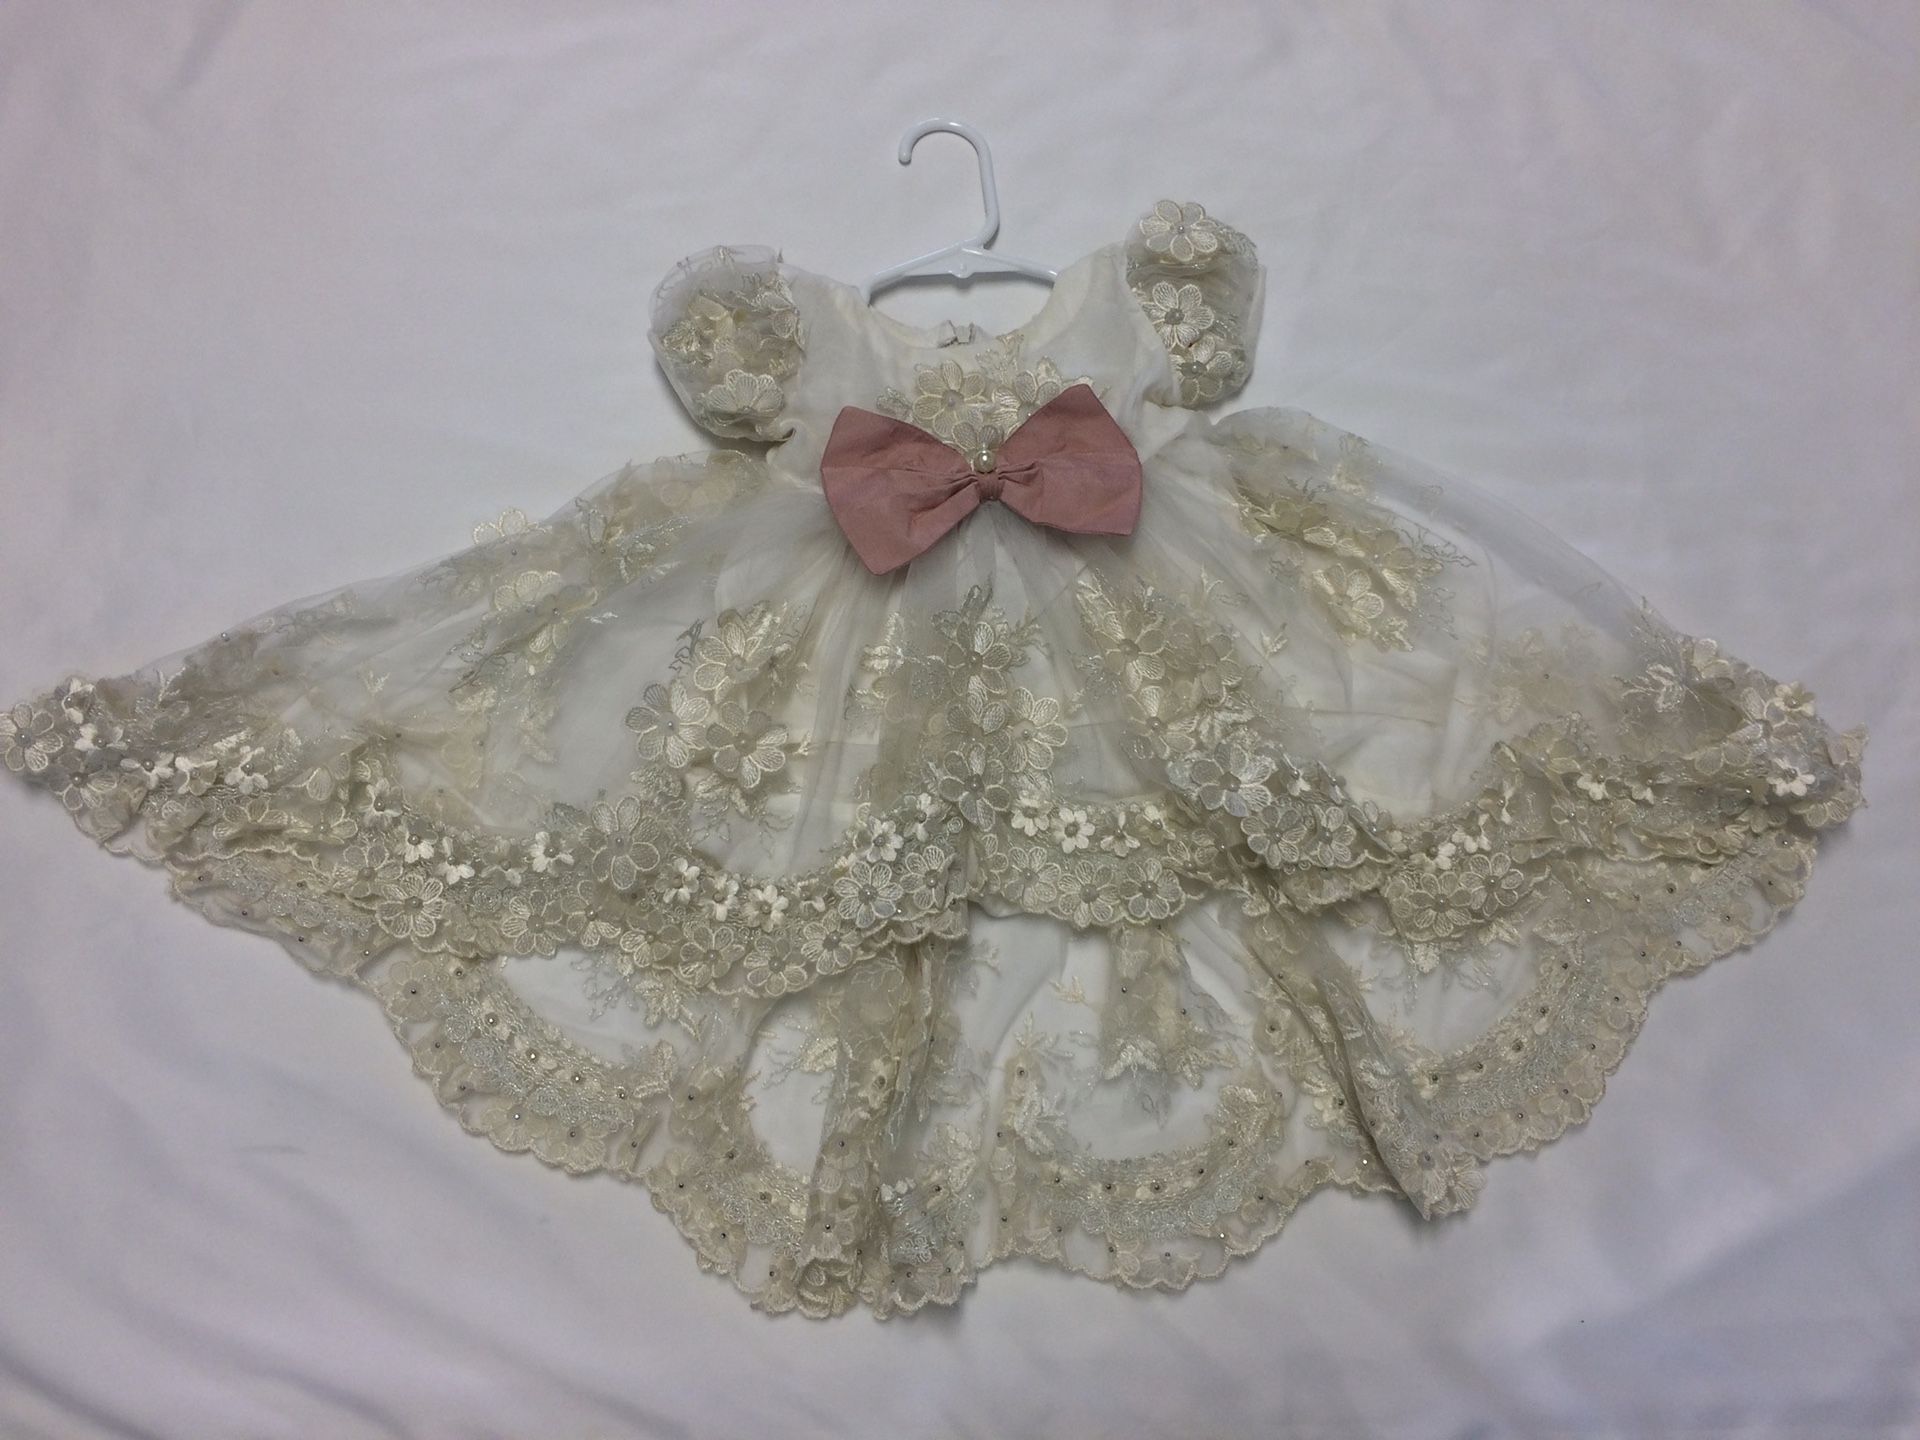 Flower Embroidery netted wedding & party dress with veil and head tie for baby girl (6-9months)